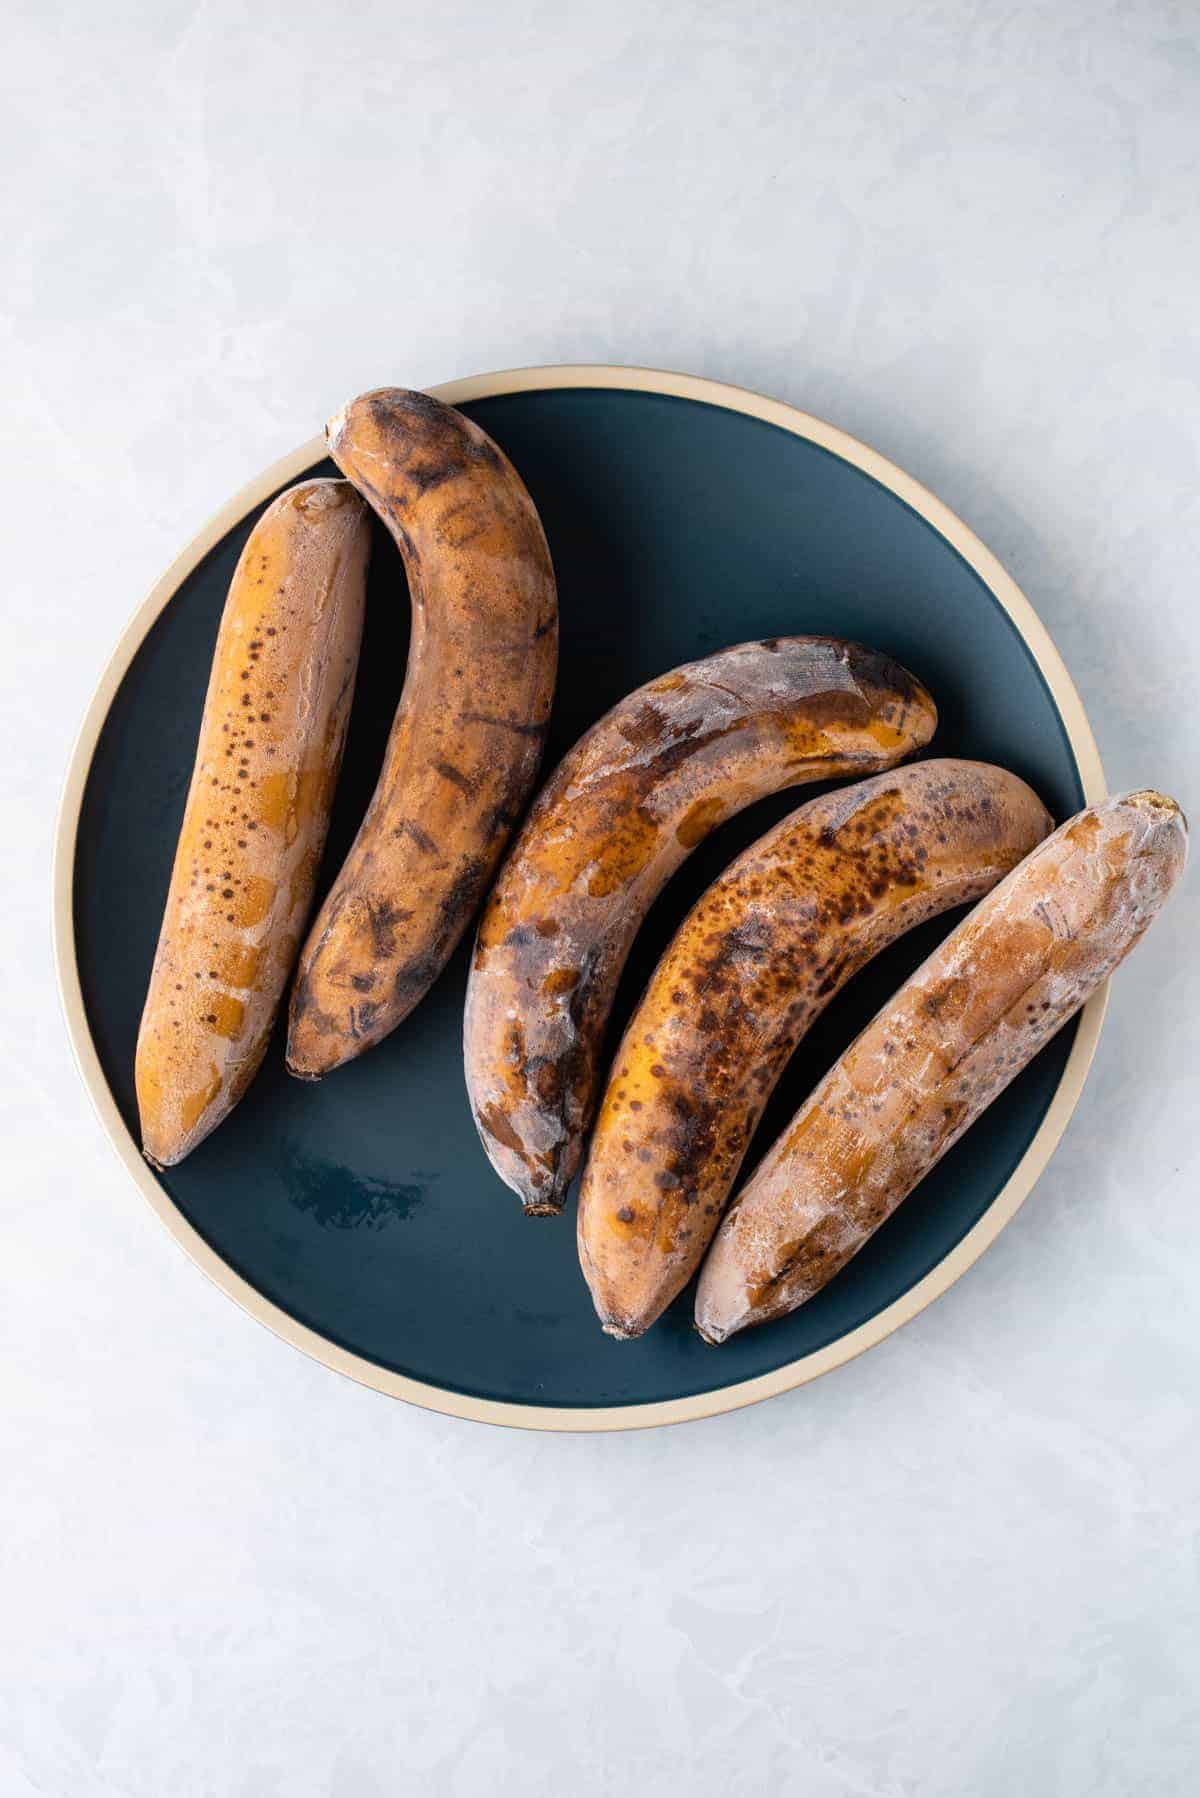 five whole frozen extra ripe bananas on a dark blue plate